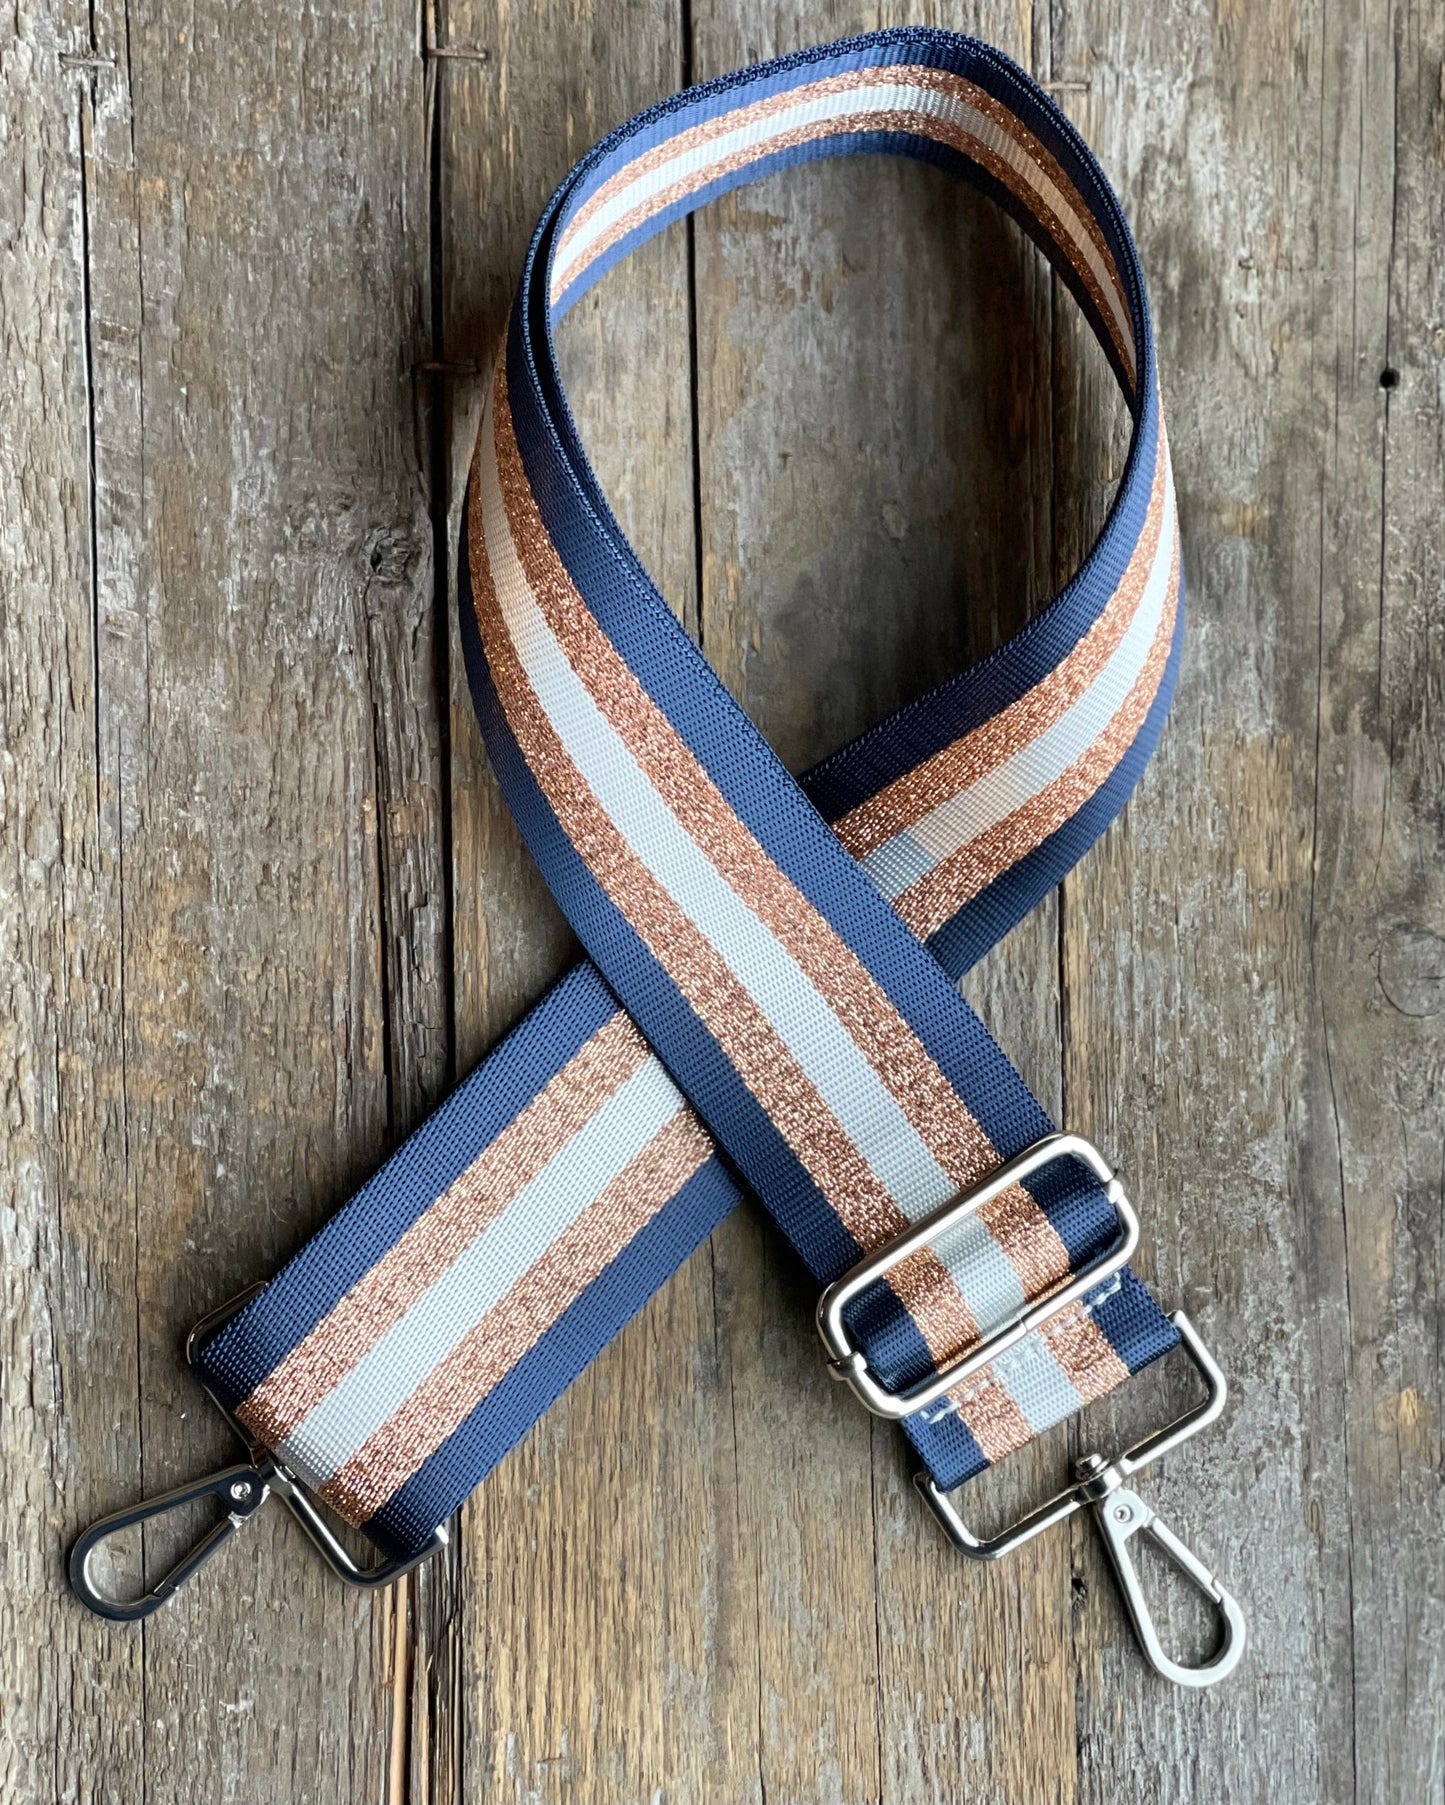 accessory Bag Strap - Navy And Rose Gold Stripes Print